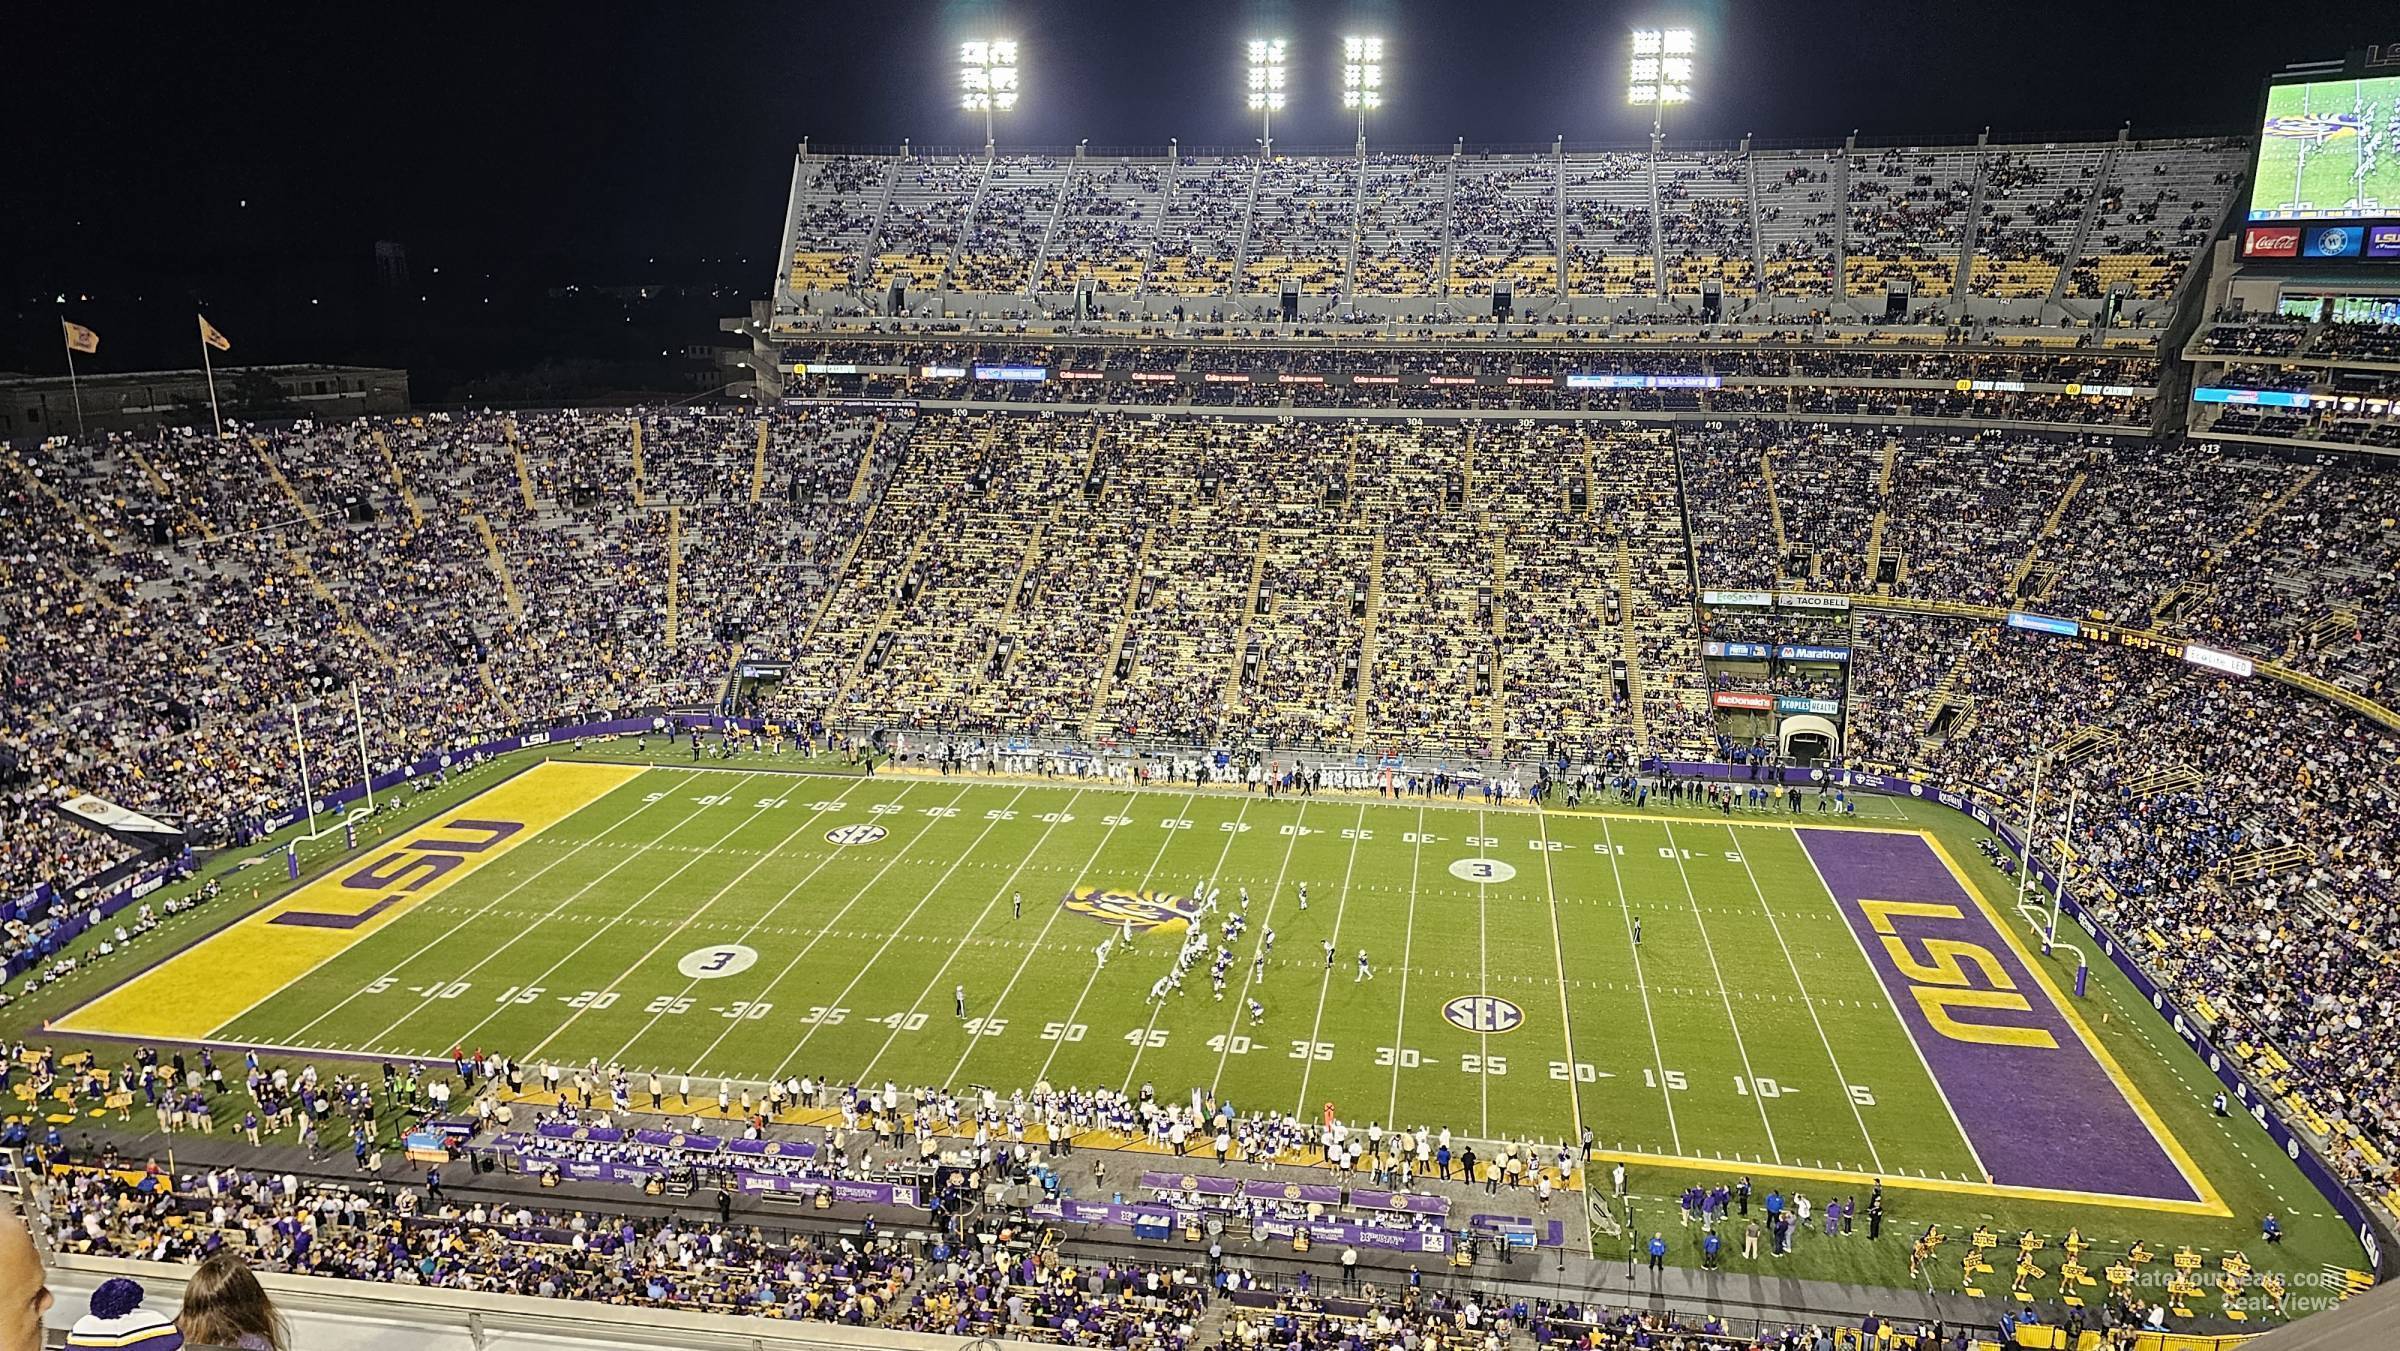 section 614, row 1 seat view  - tiger stadium